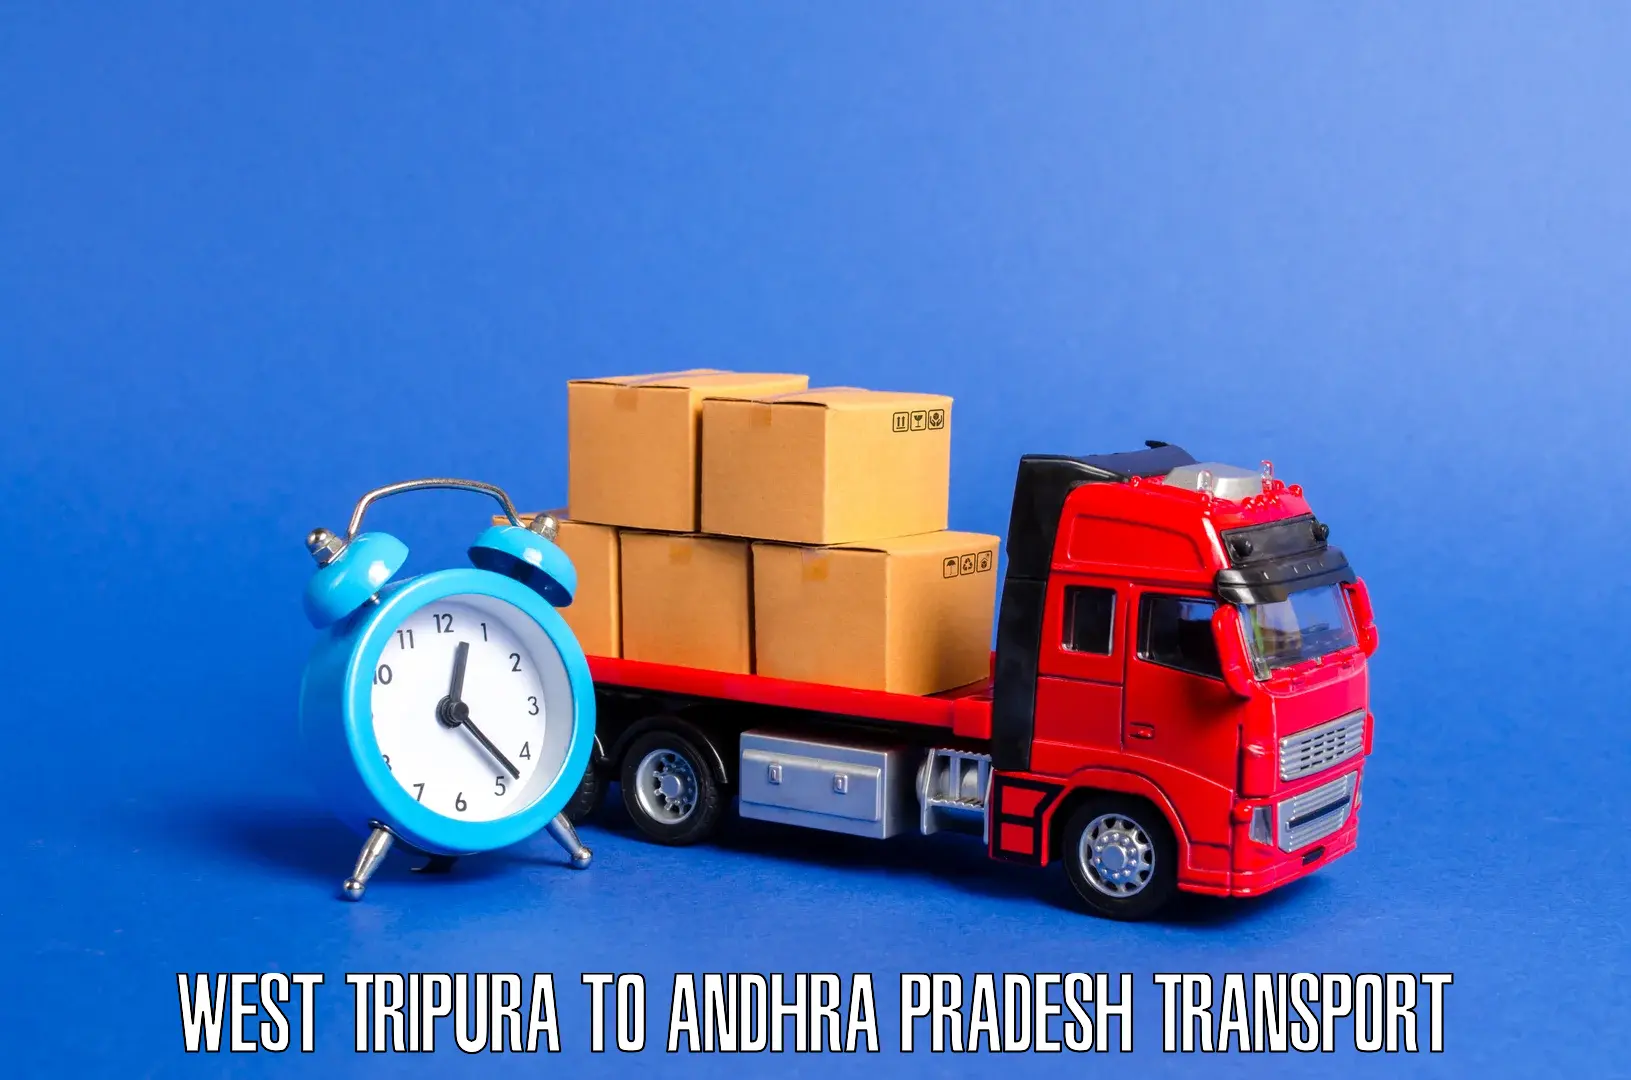 Nearby transport service in West Tripura to Repalle